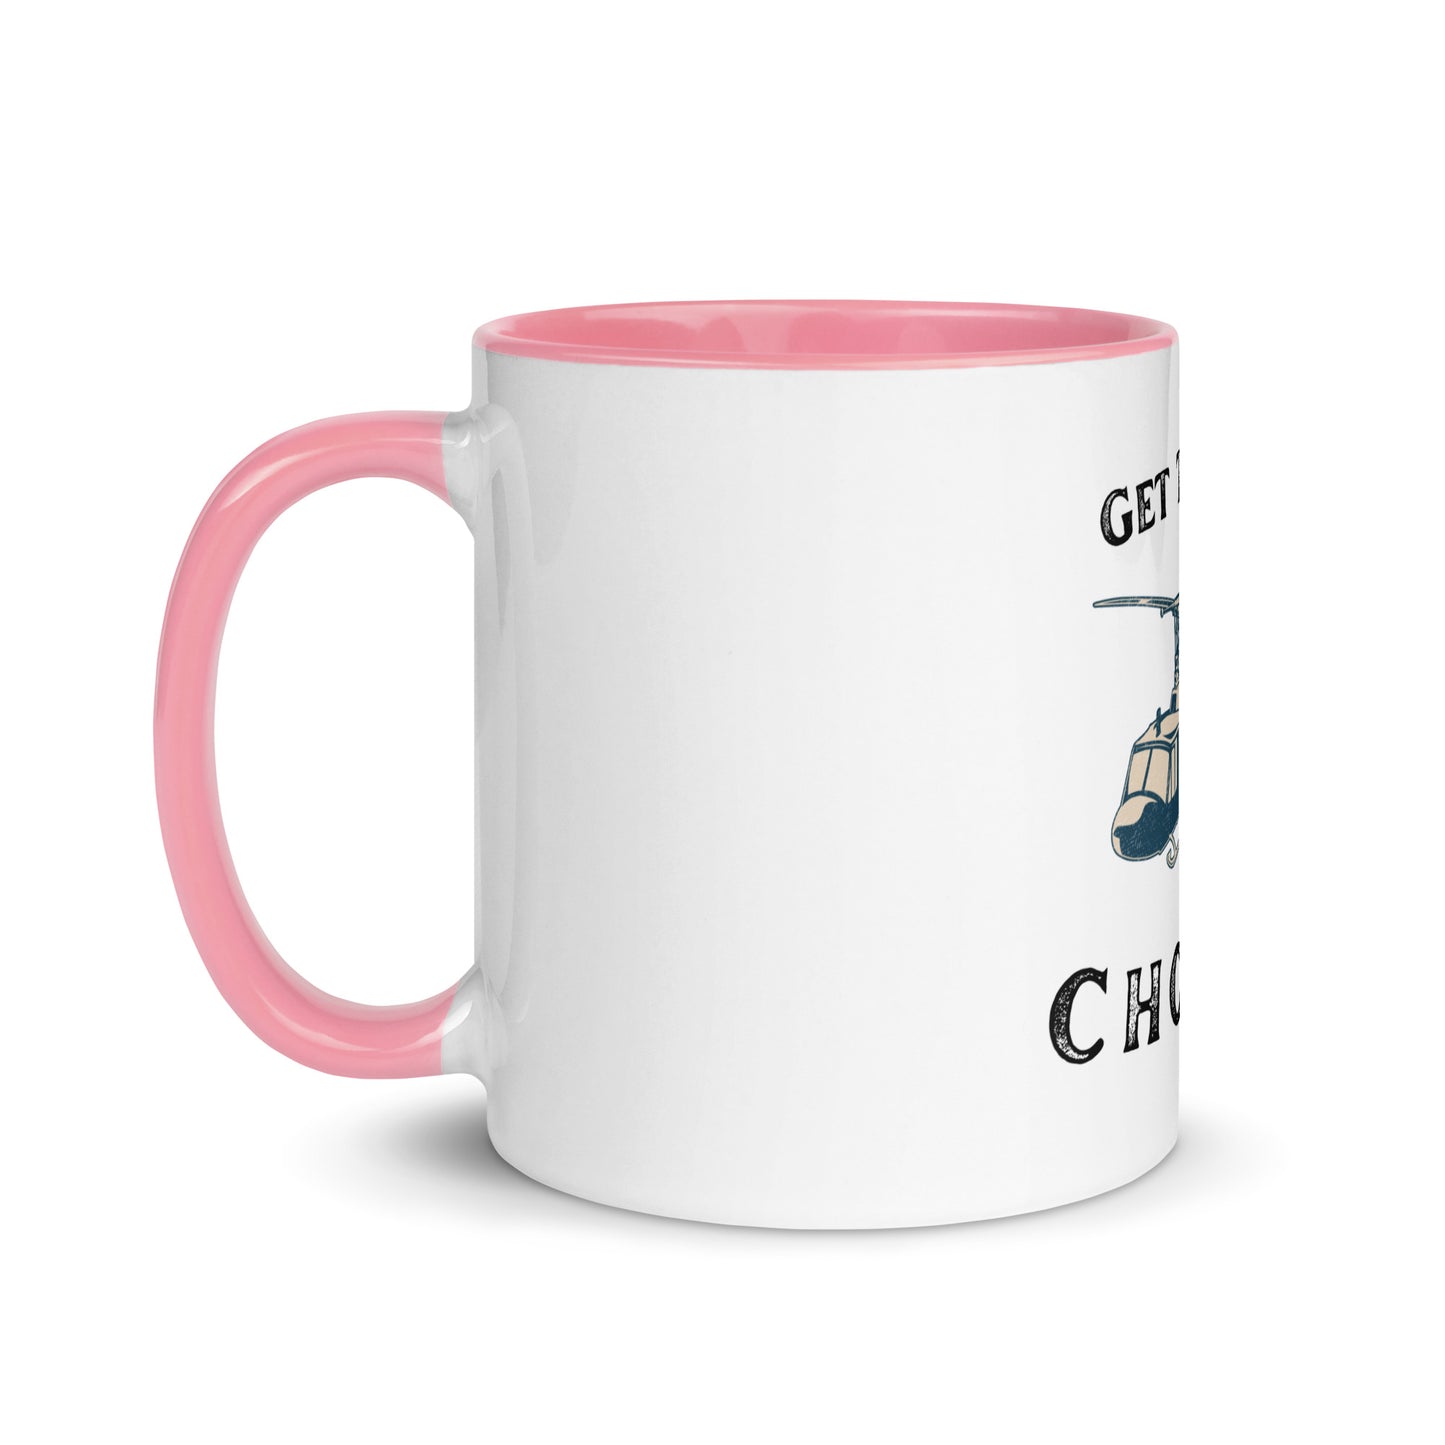 "Get To The Choppa" Coffee Mug - Weave Got Gifts - Unique Gifts You Won’t Find Anywhere Else!